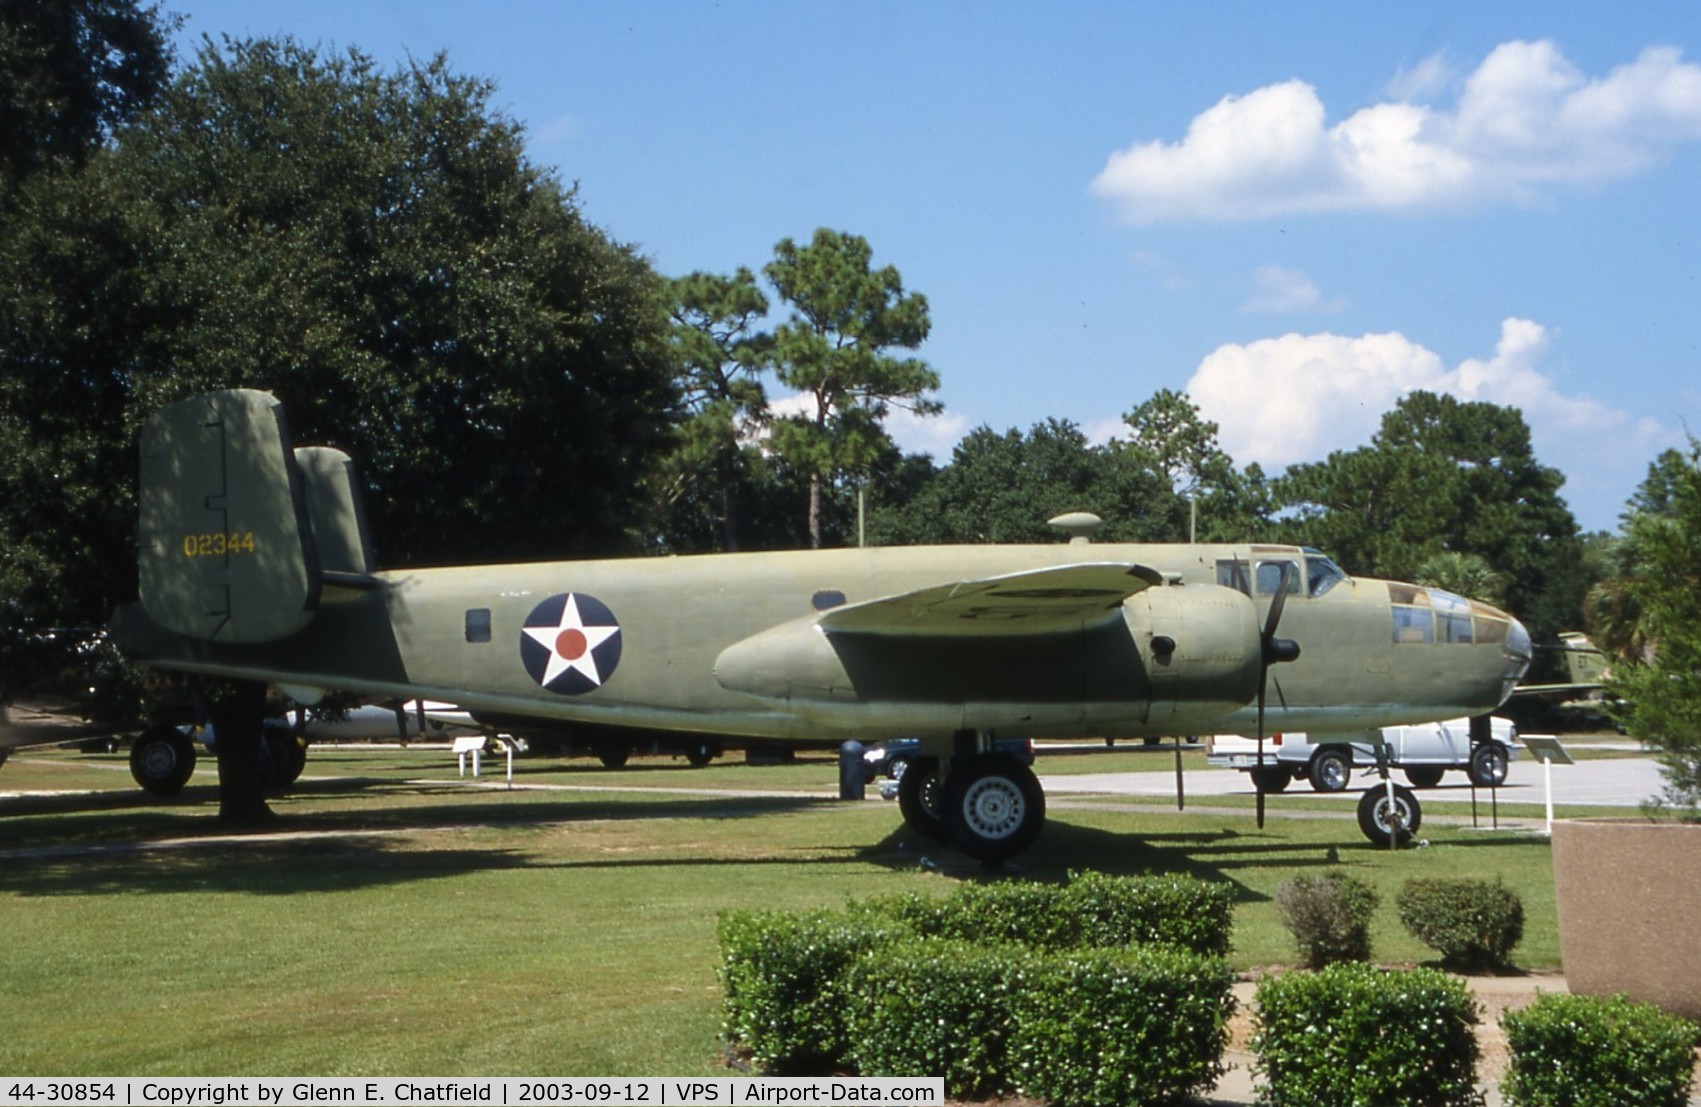 44-30854, 1944 North American TB-25N-25/27-NC Mitchell C/N 108-34129, Air Force Armament Museum. Was last B-25 on Air Force inventory, retired in 1959